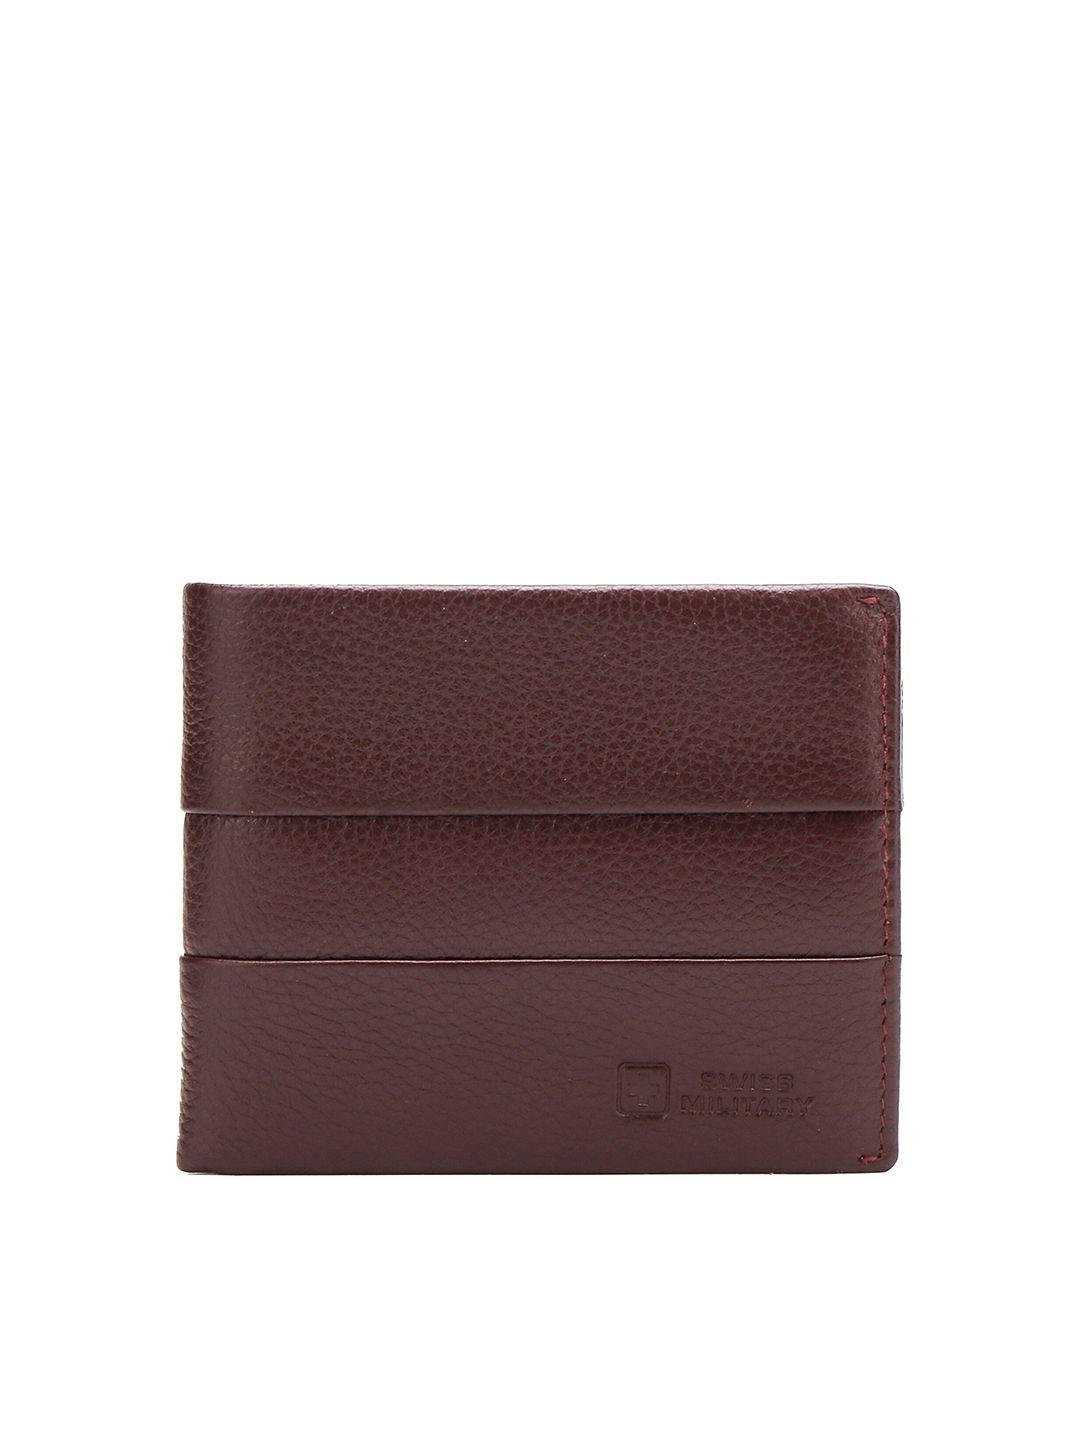 swiss military unisex maroon textured leather two fold wallet